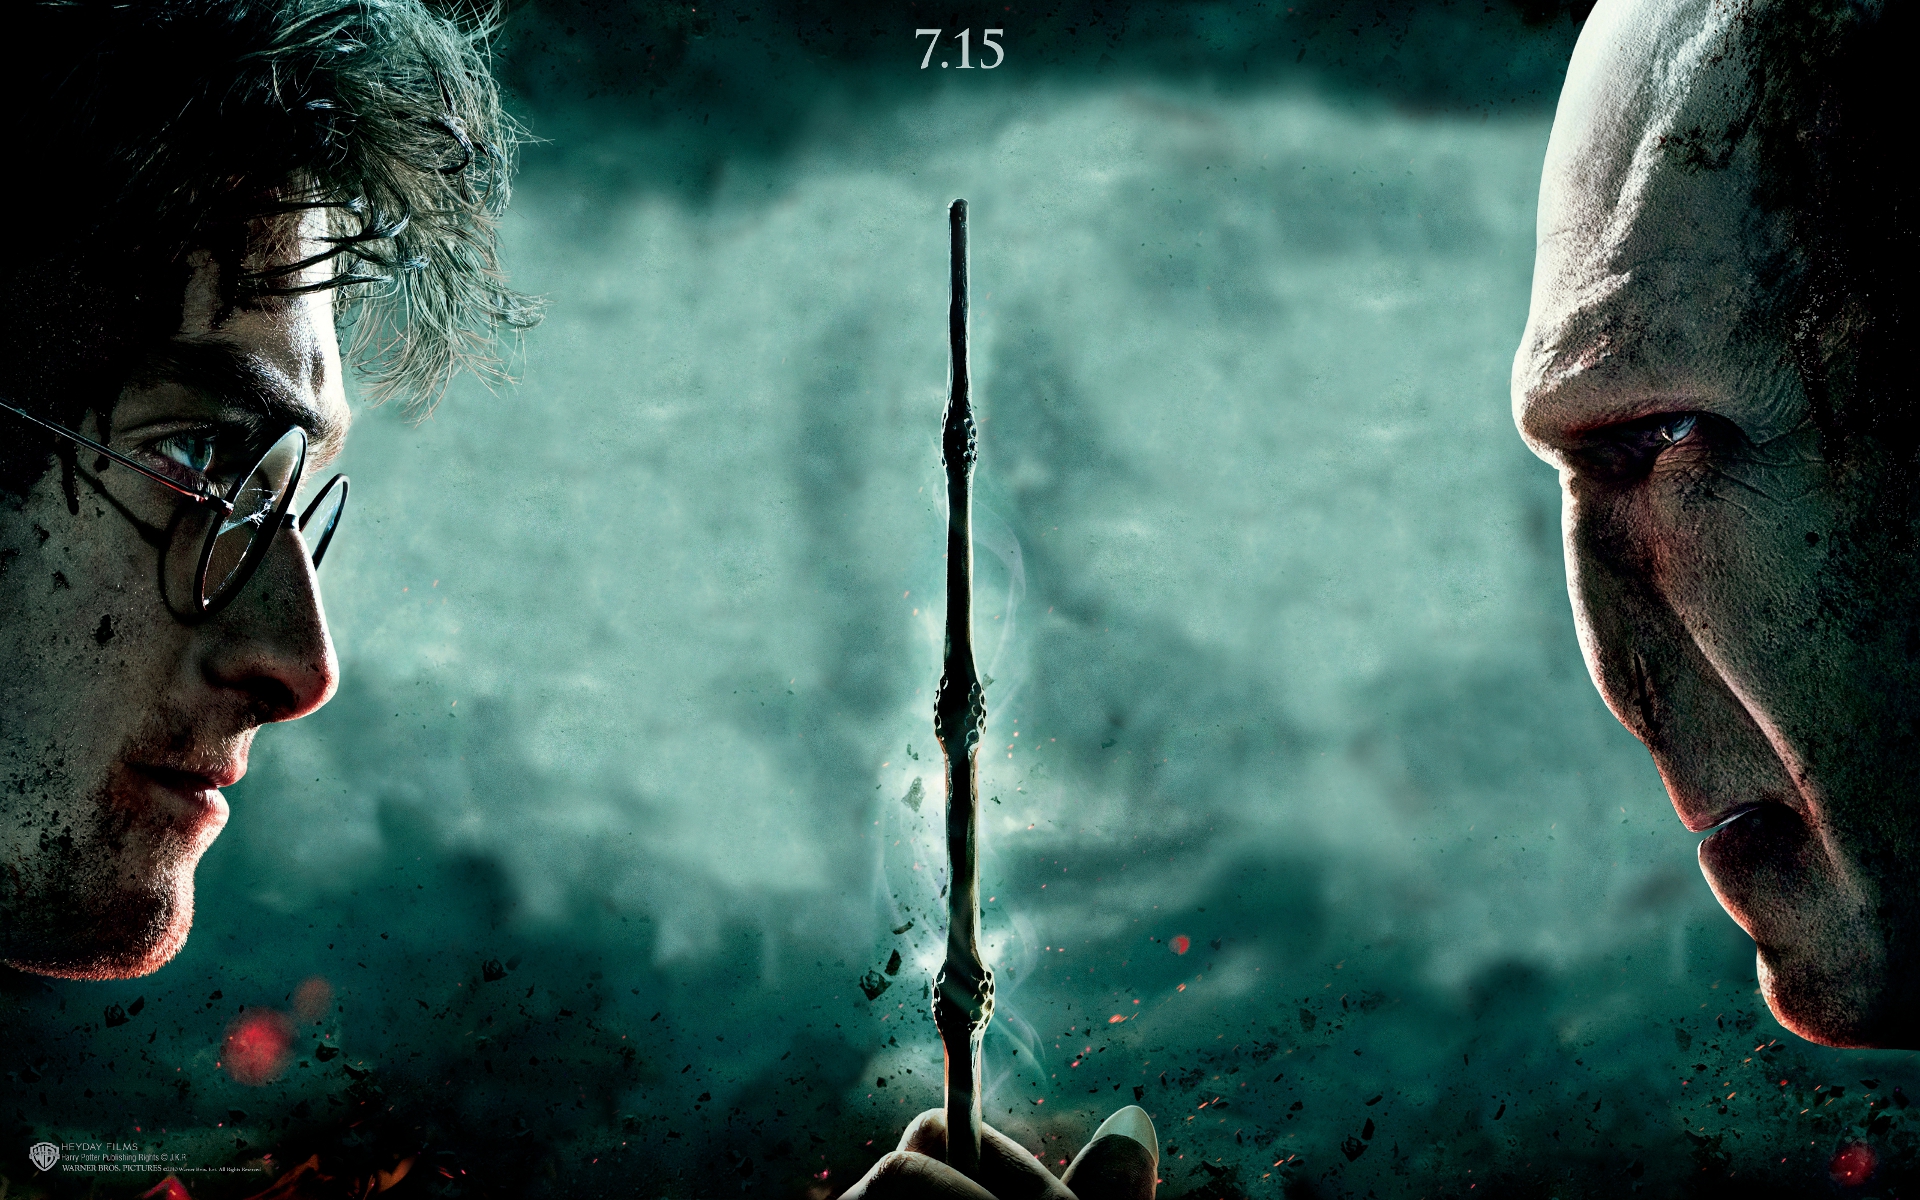  potter and lord voldemort 1920x1200 16 10 back to wallpaper back home